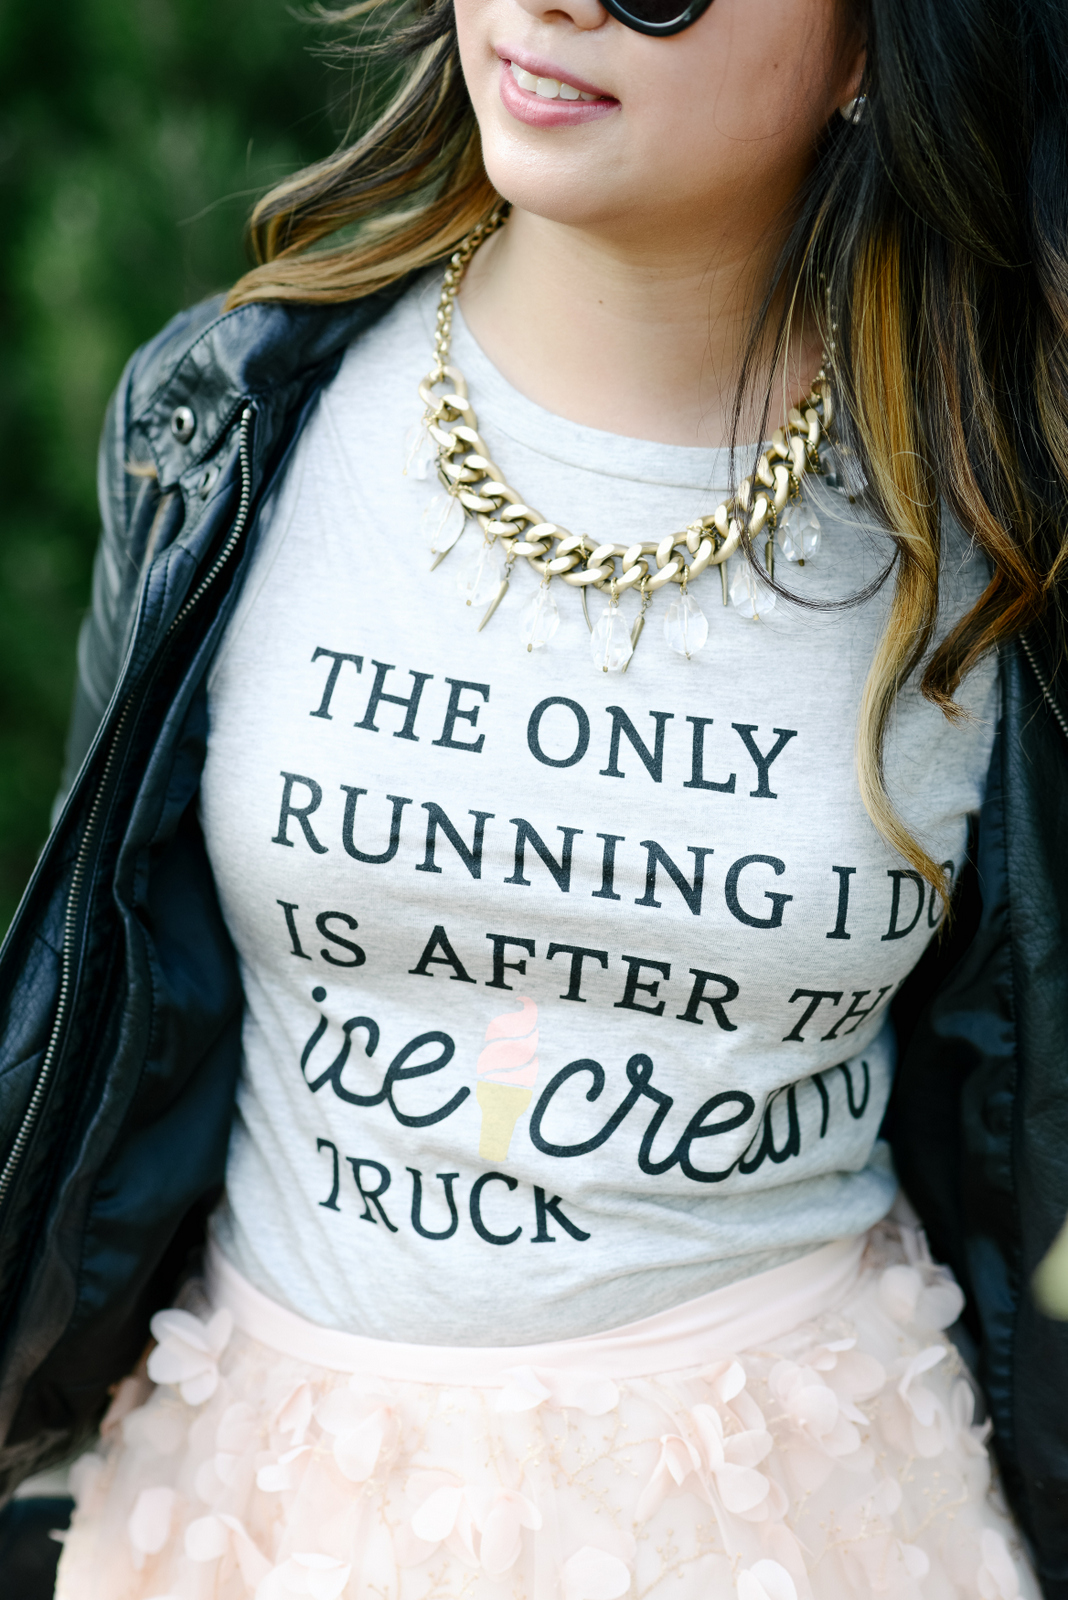 The only running I do is after the ice cream truck